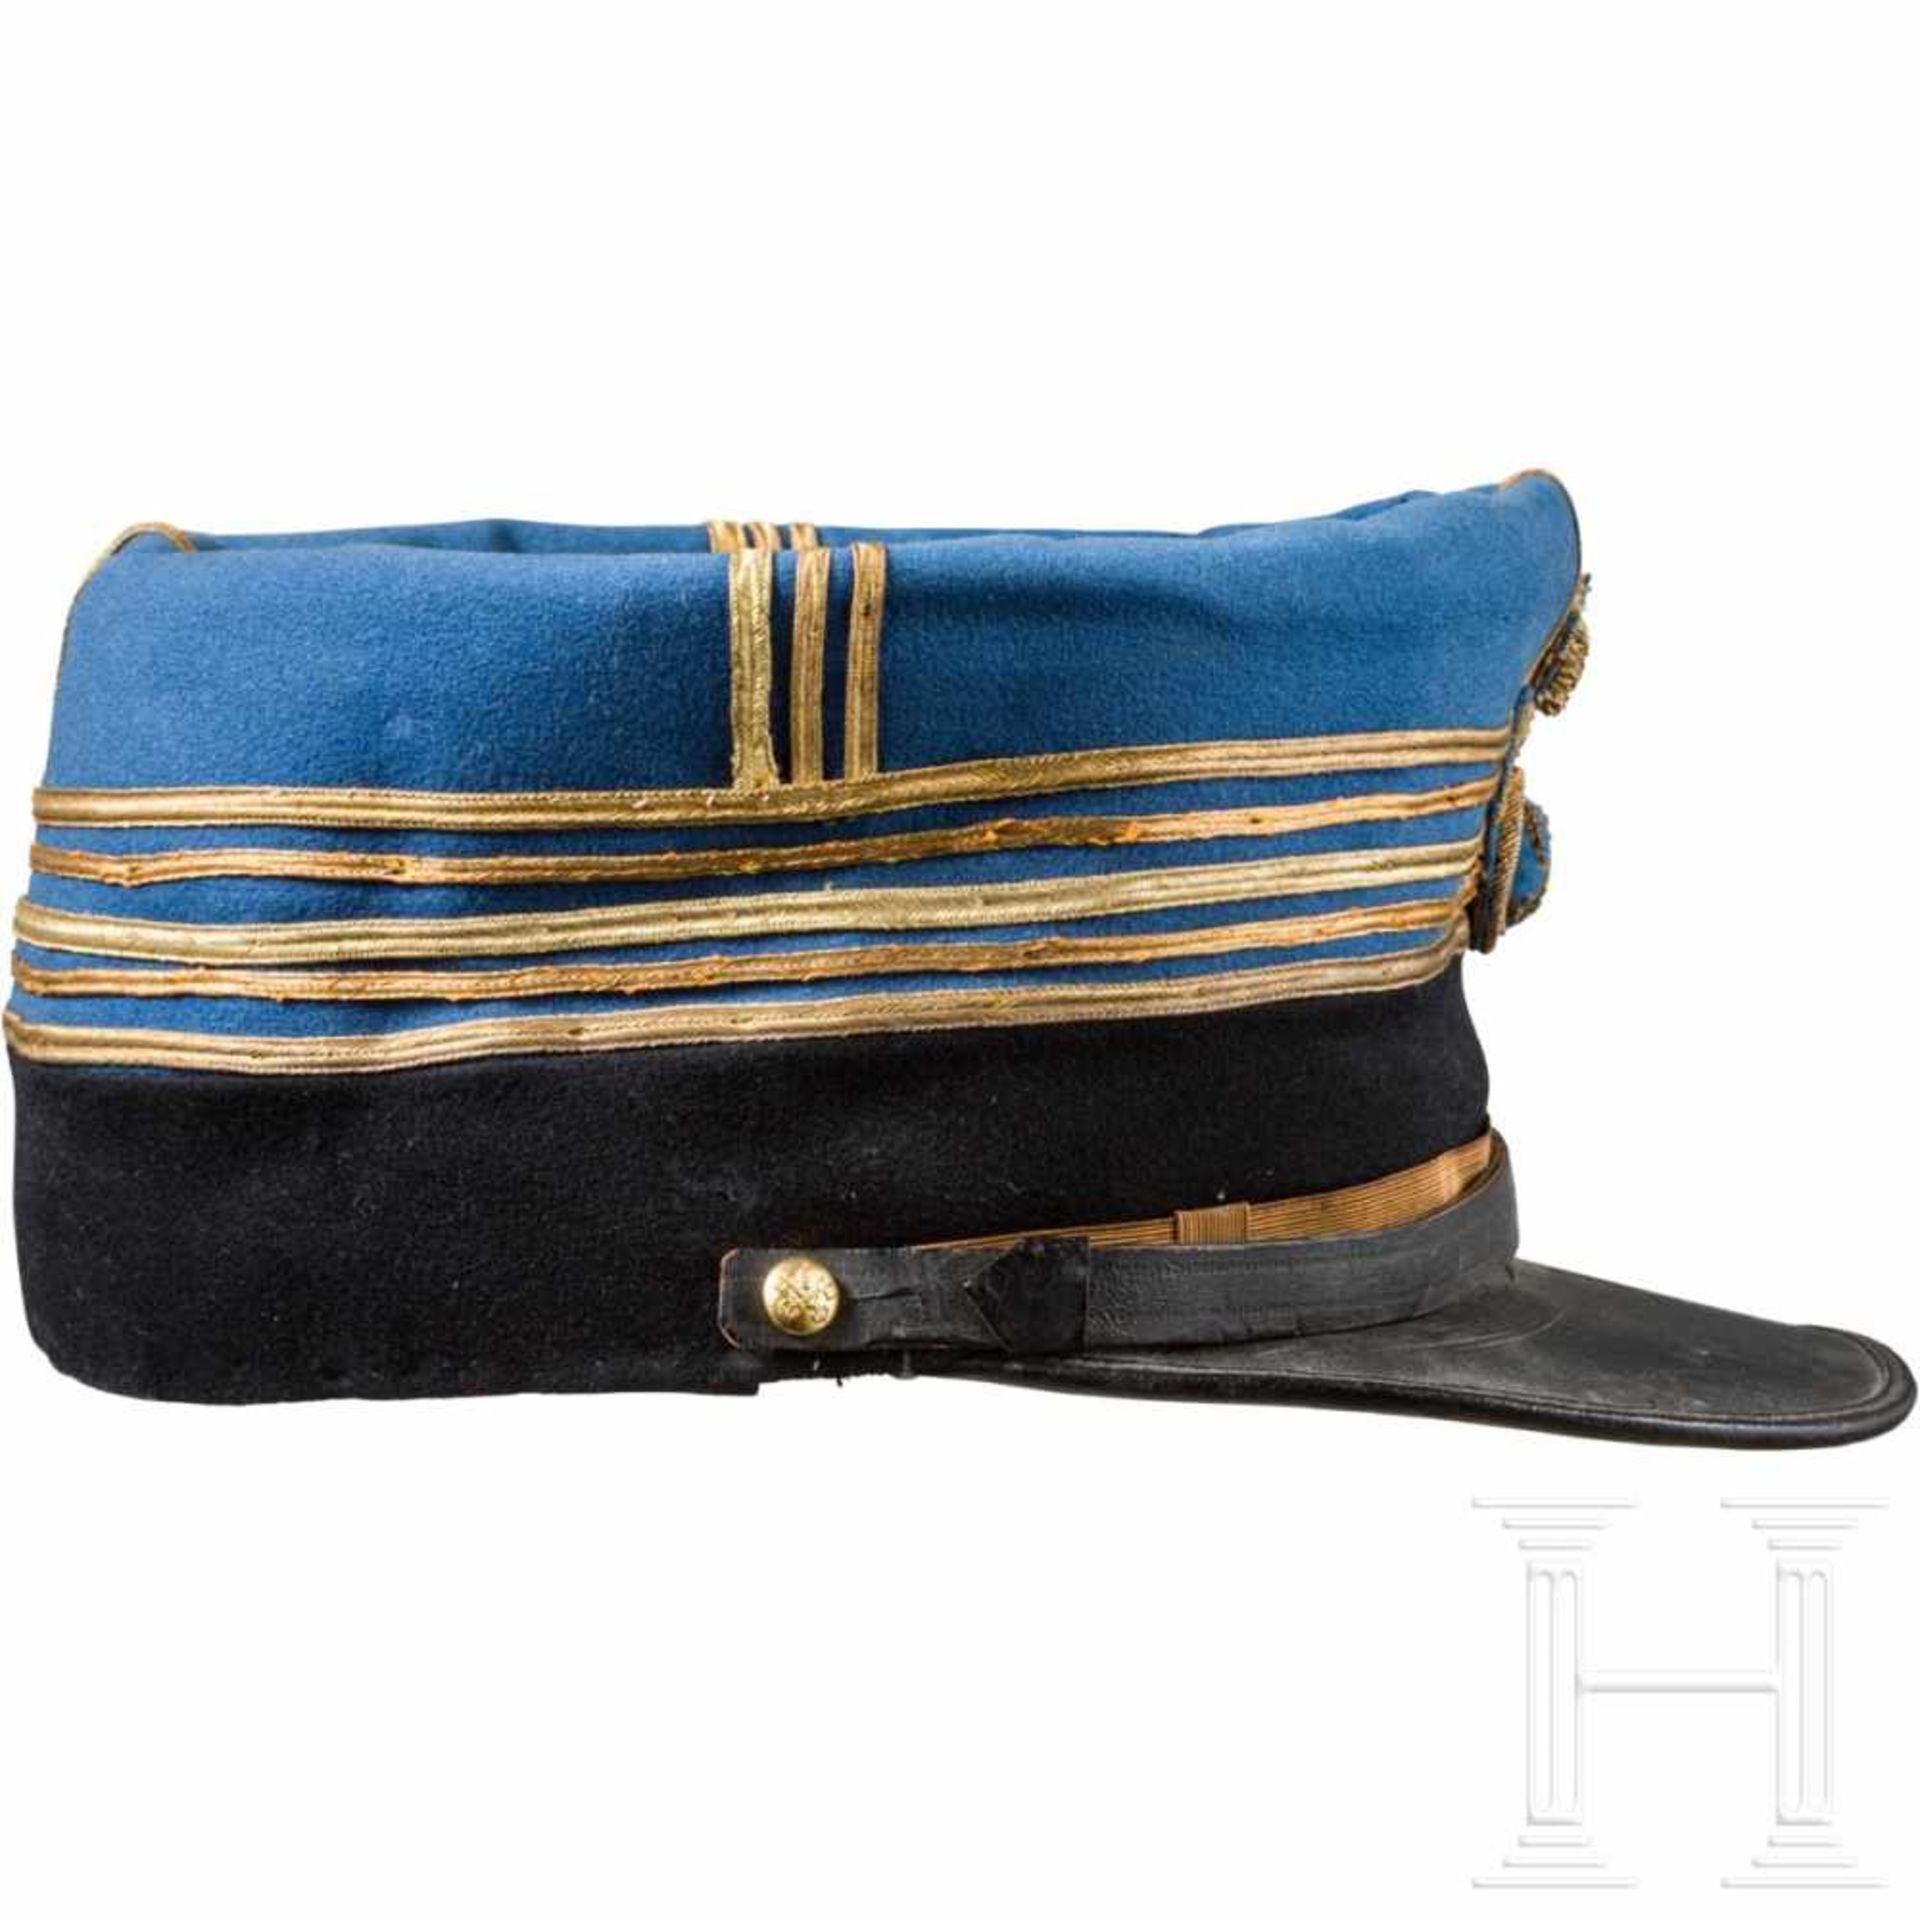 Cap, bandelier and aiguillette for officers of the "Guardia Nobile", early 20th centuryKorpus aus - Bild 2 aus 3